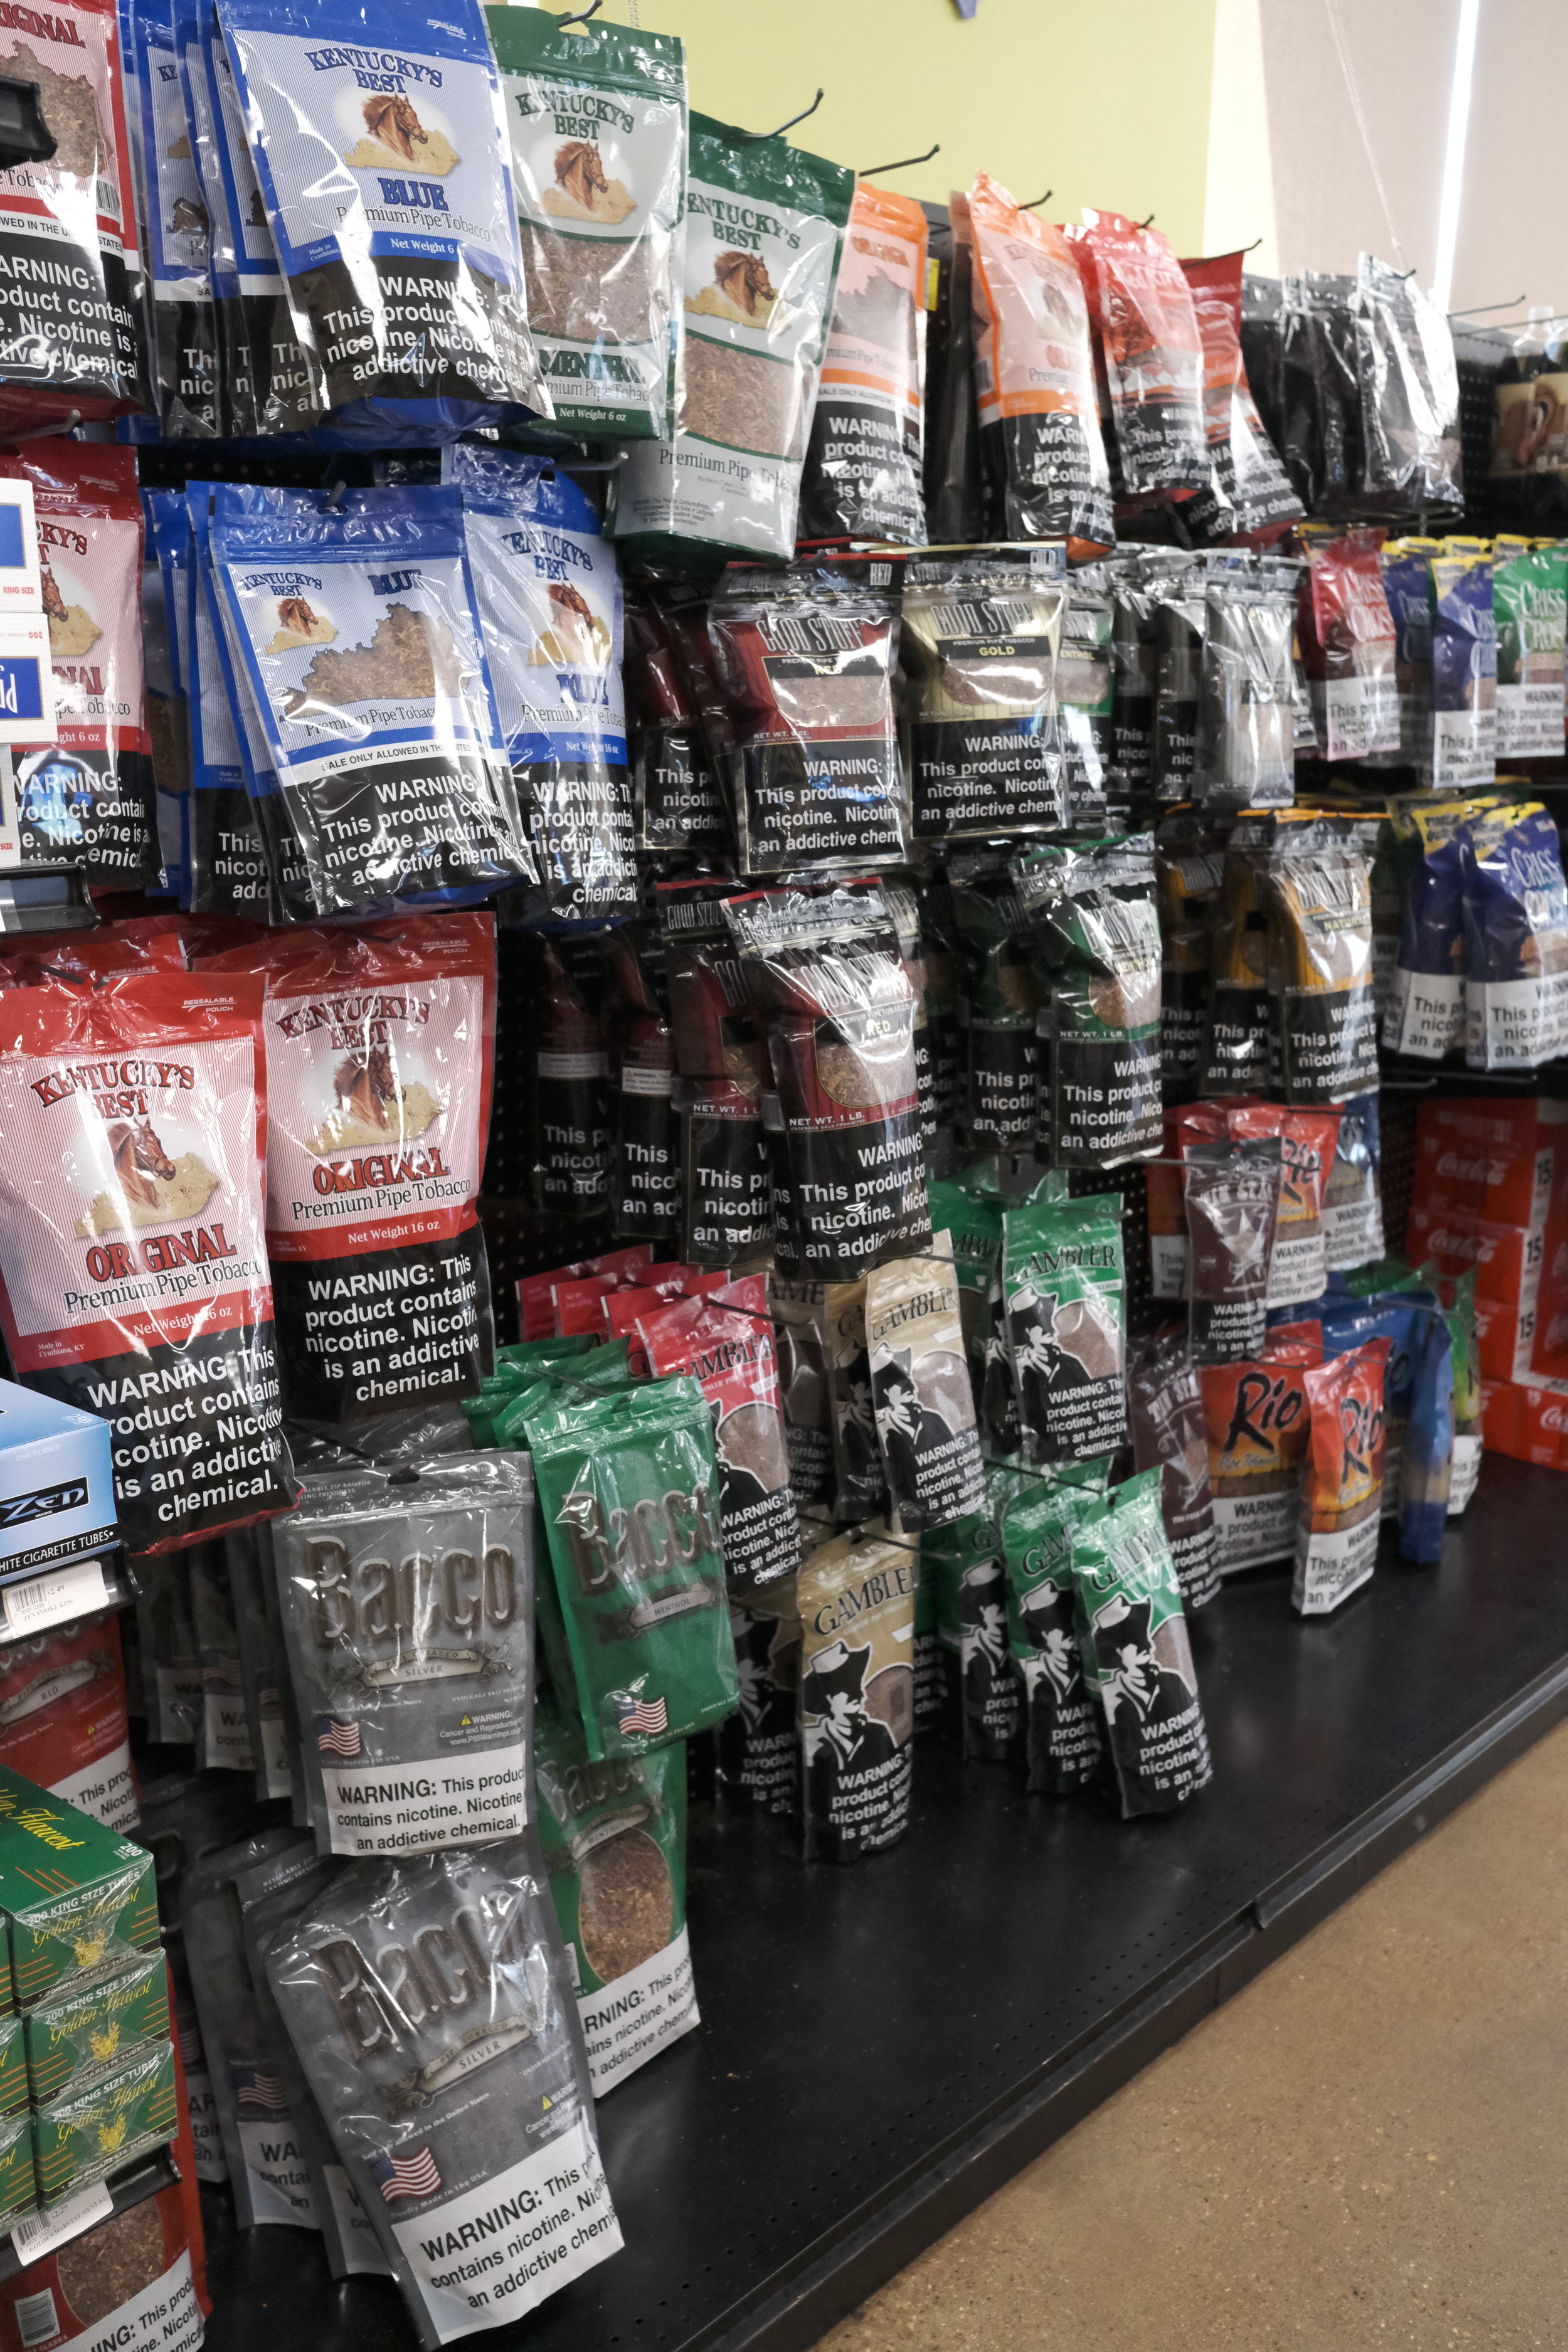  Stop in for your self-rolling tobacco needs! We have bagged tobaccos, filters, tubes, rollers and papers, and if you need anything else - just ask! 